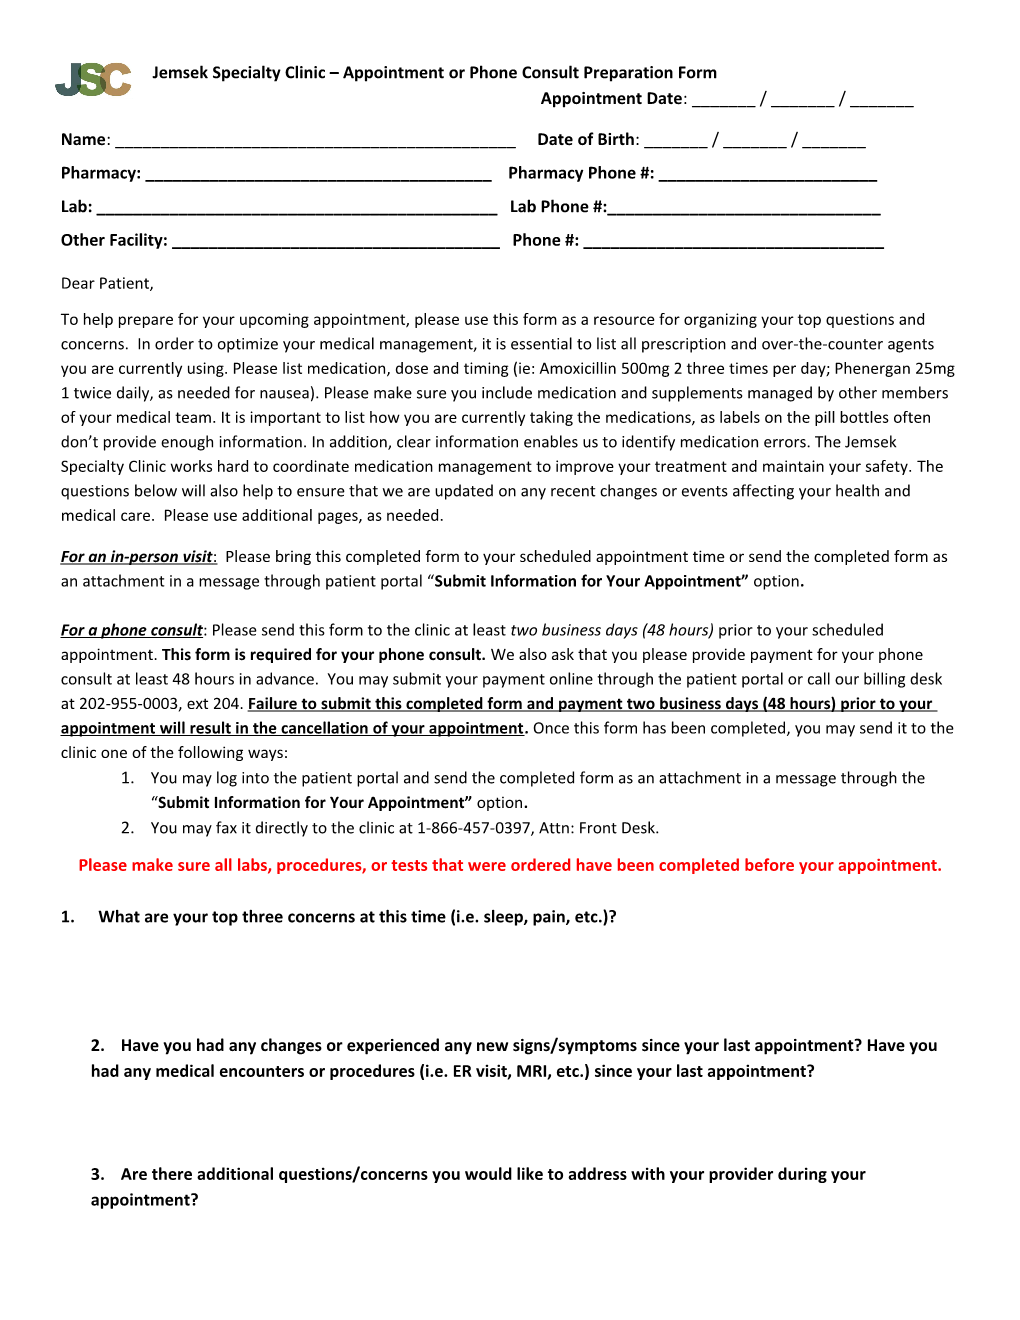 Jemsek Specialty Clinic Appointment Or Phone Consult Preparation Form